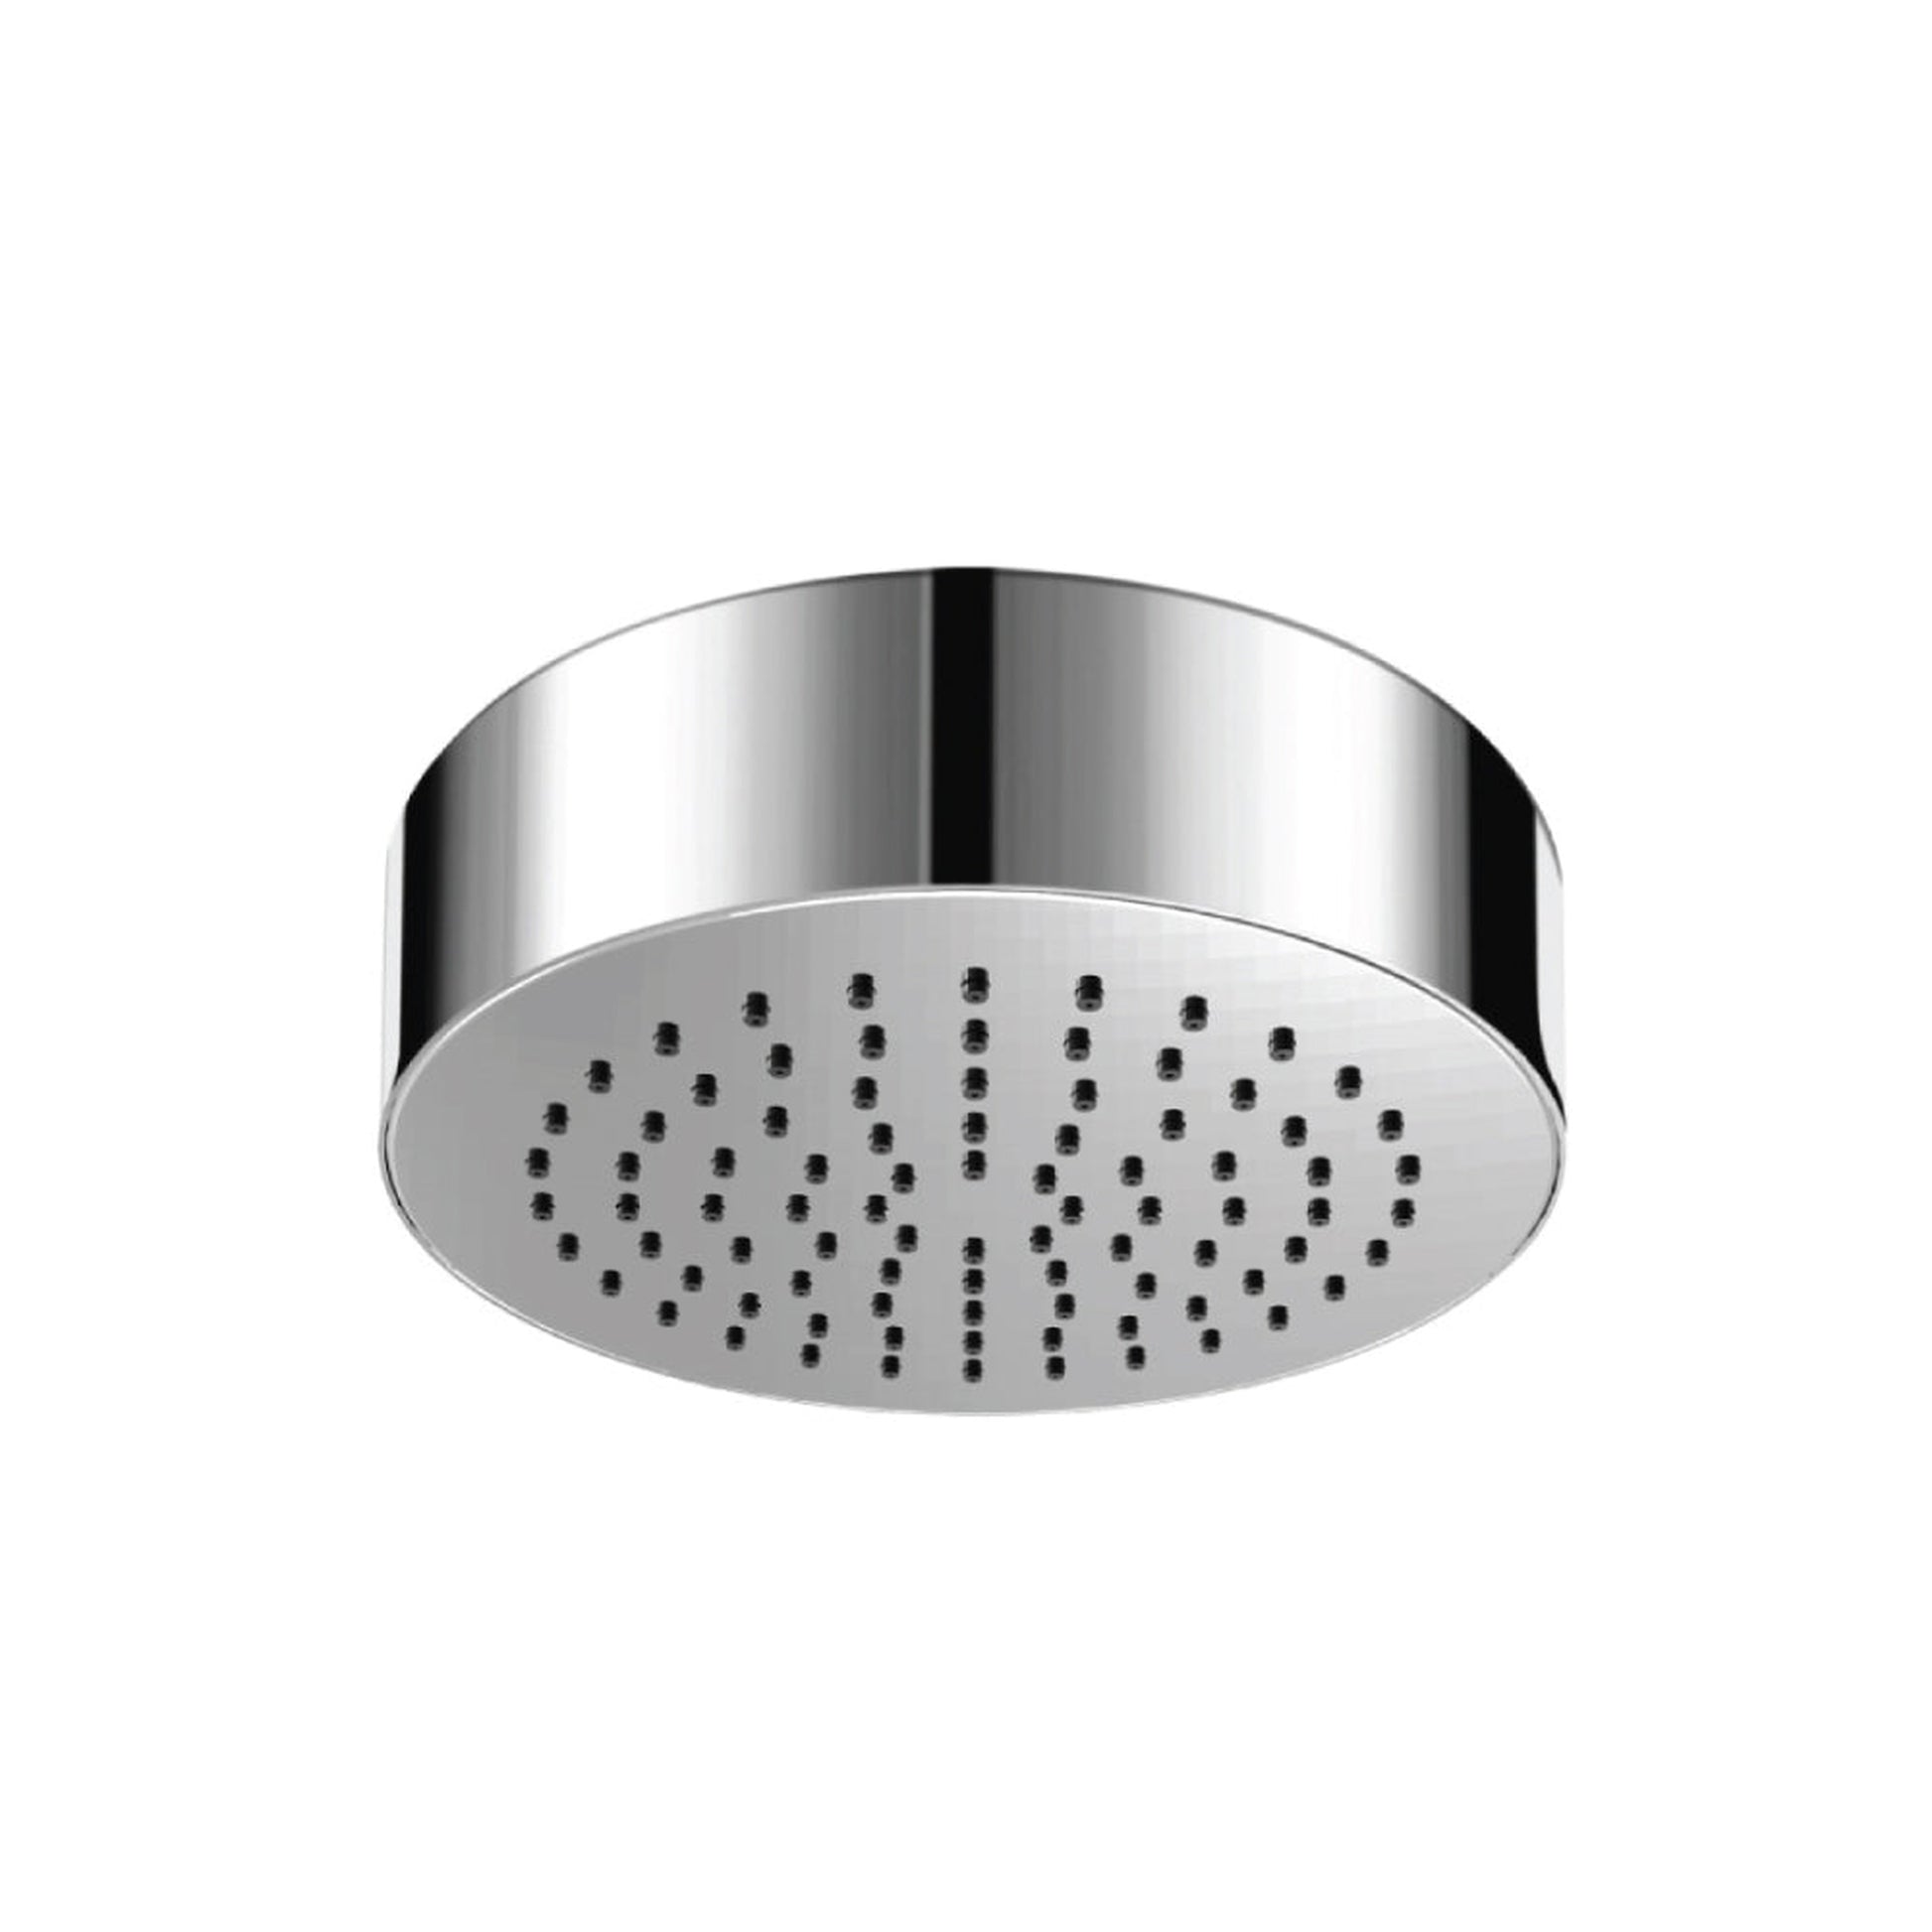 Isenberg Universal Fixtures 7" Single Function Round Polished Nickel PVD Solid Brass Rain Shower Head